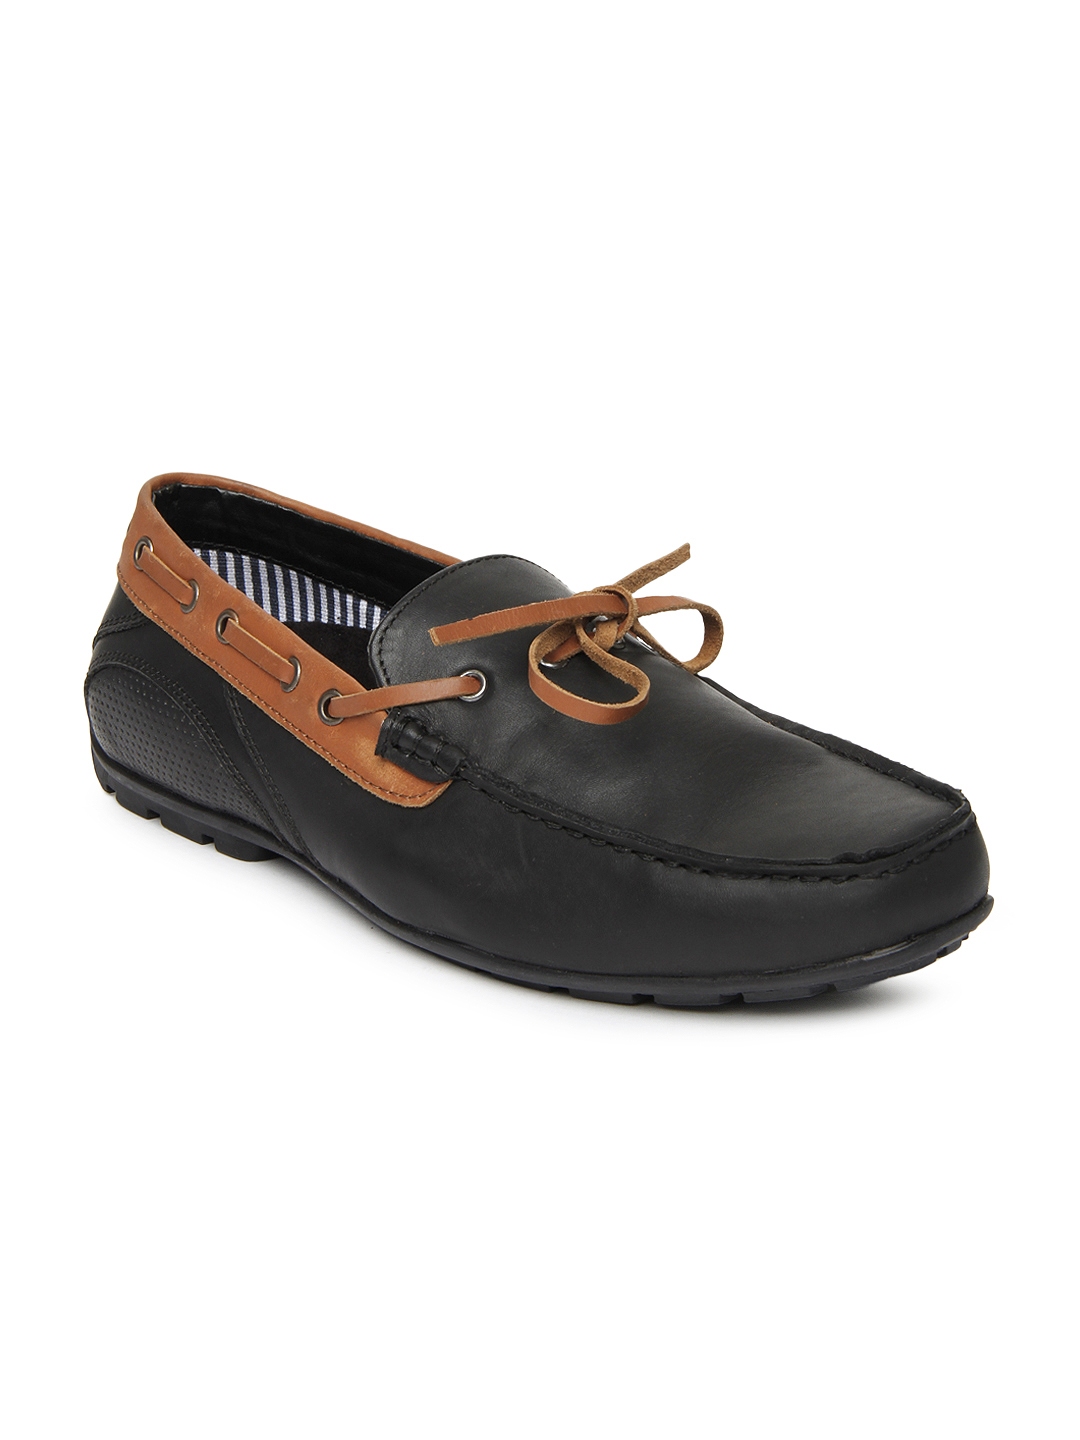 Buy Numero Uno Men Black Leather Boat Shoes - Casual Shoes for Men ...